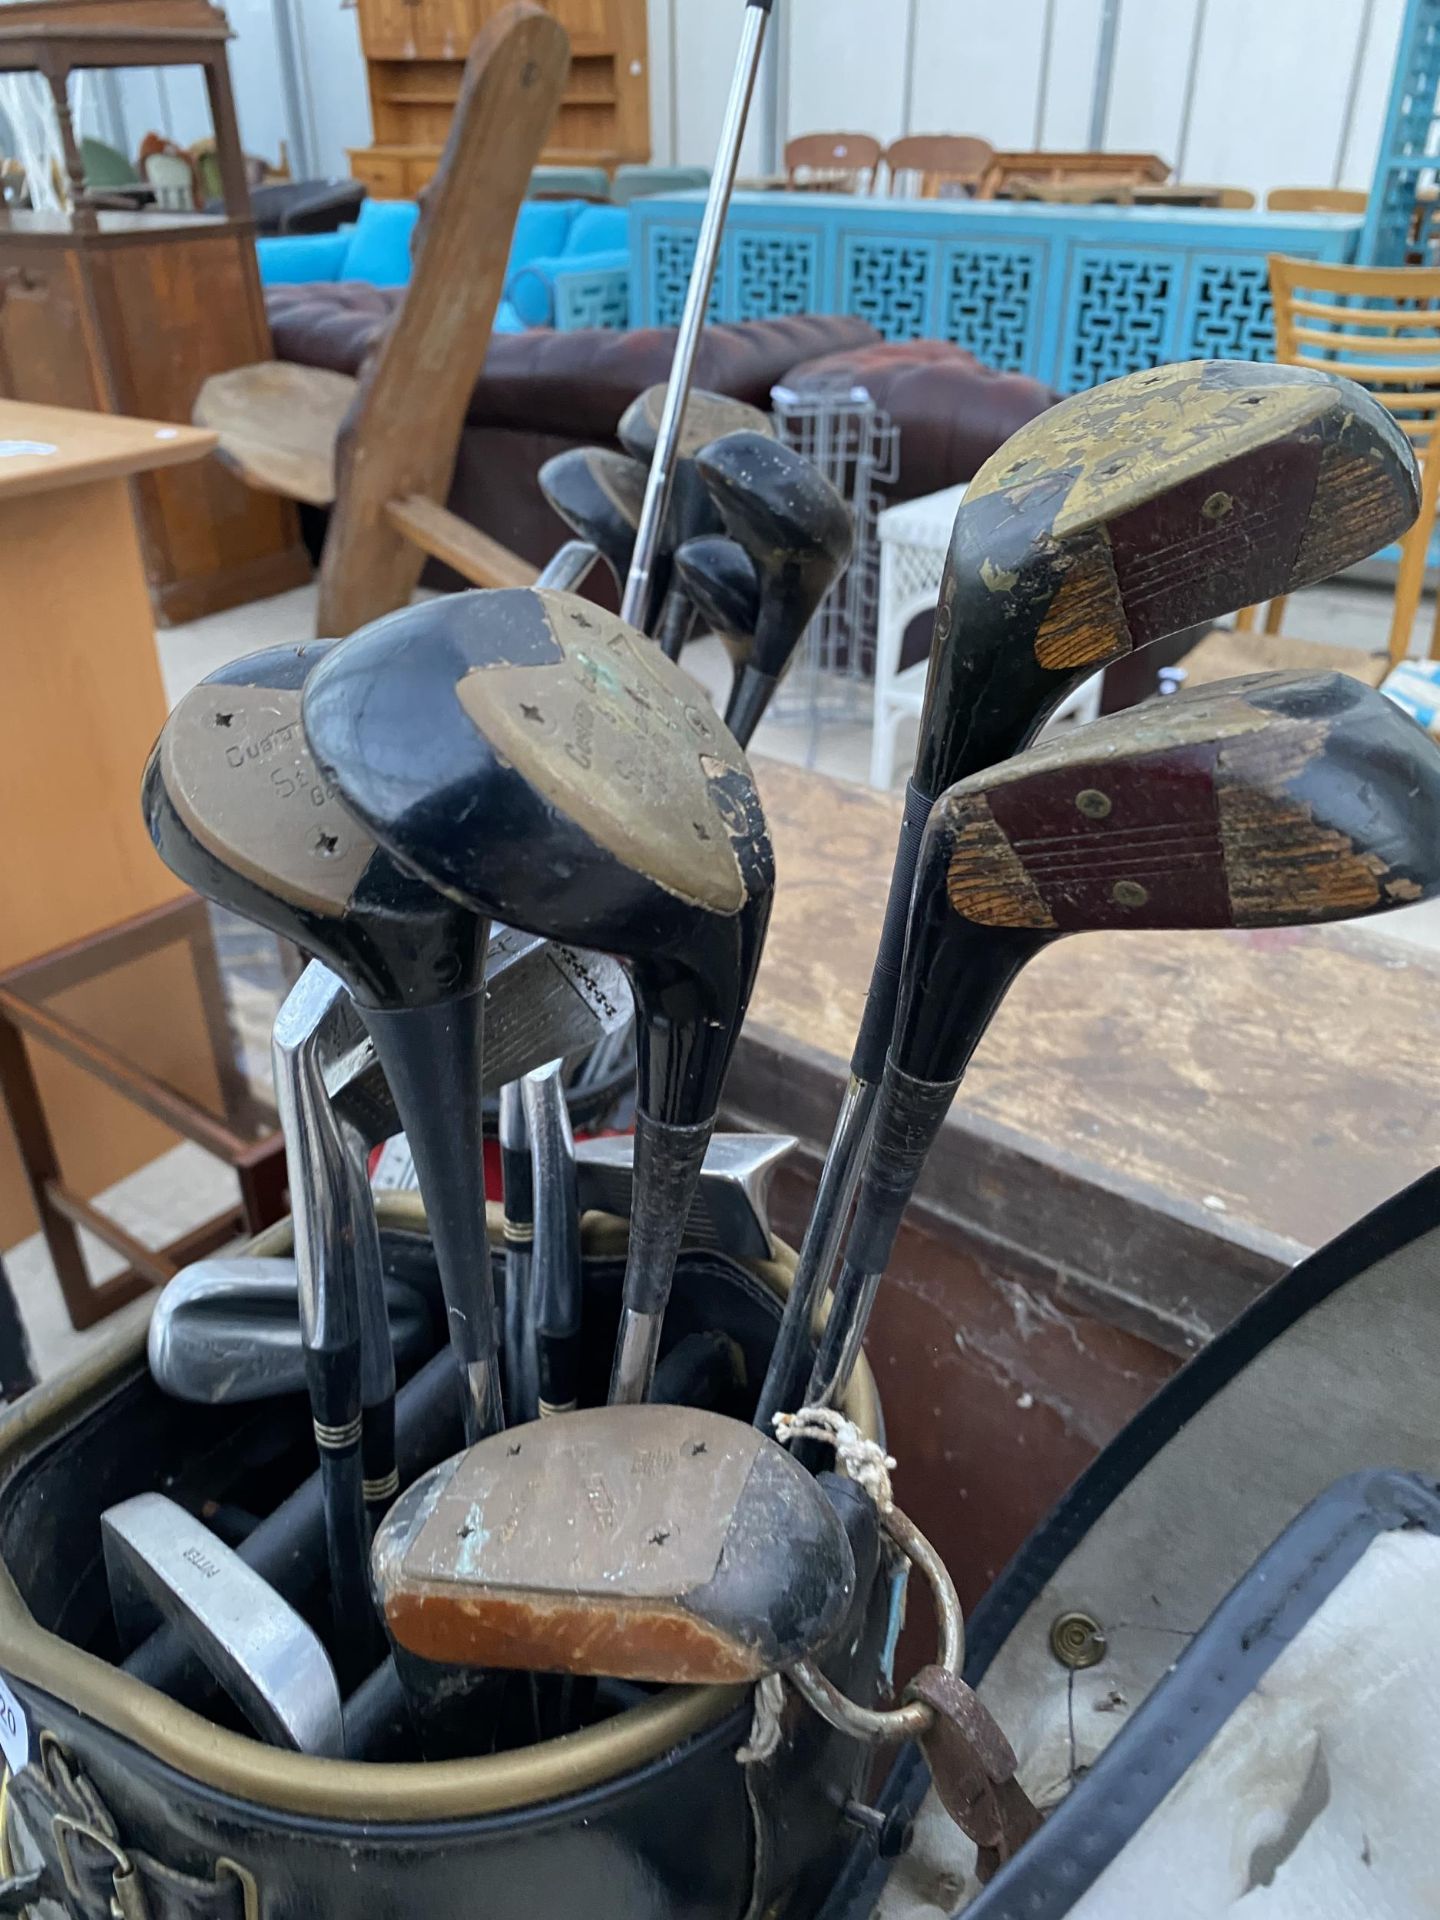 TWO VINTAGE GOLF BAGS AND AN ASSORTMENT OF VINTAGE GOLF CLUBS - Image 5 of 5